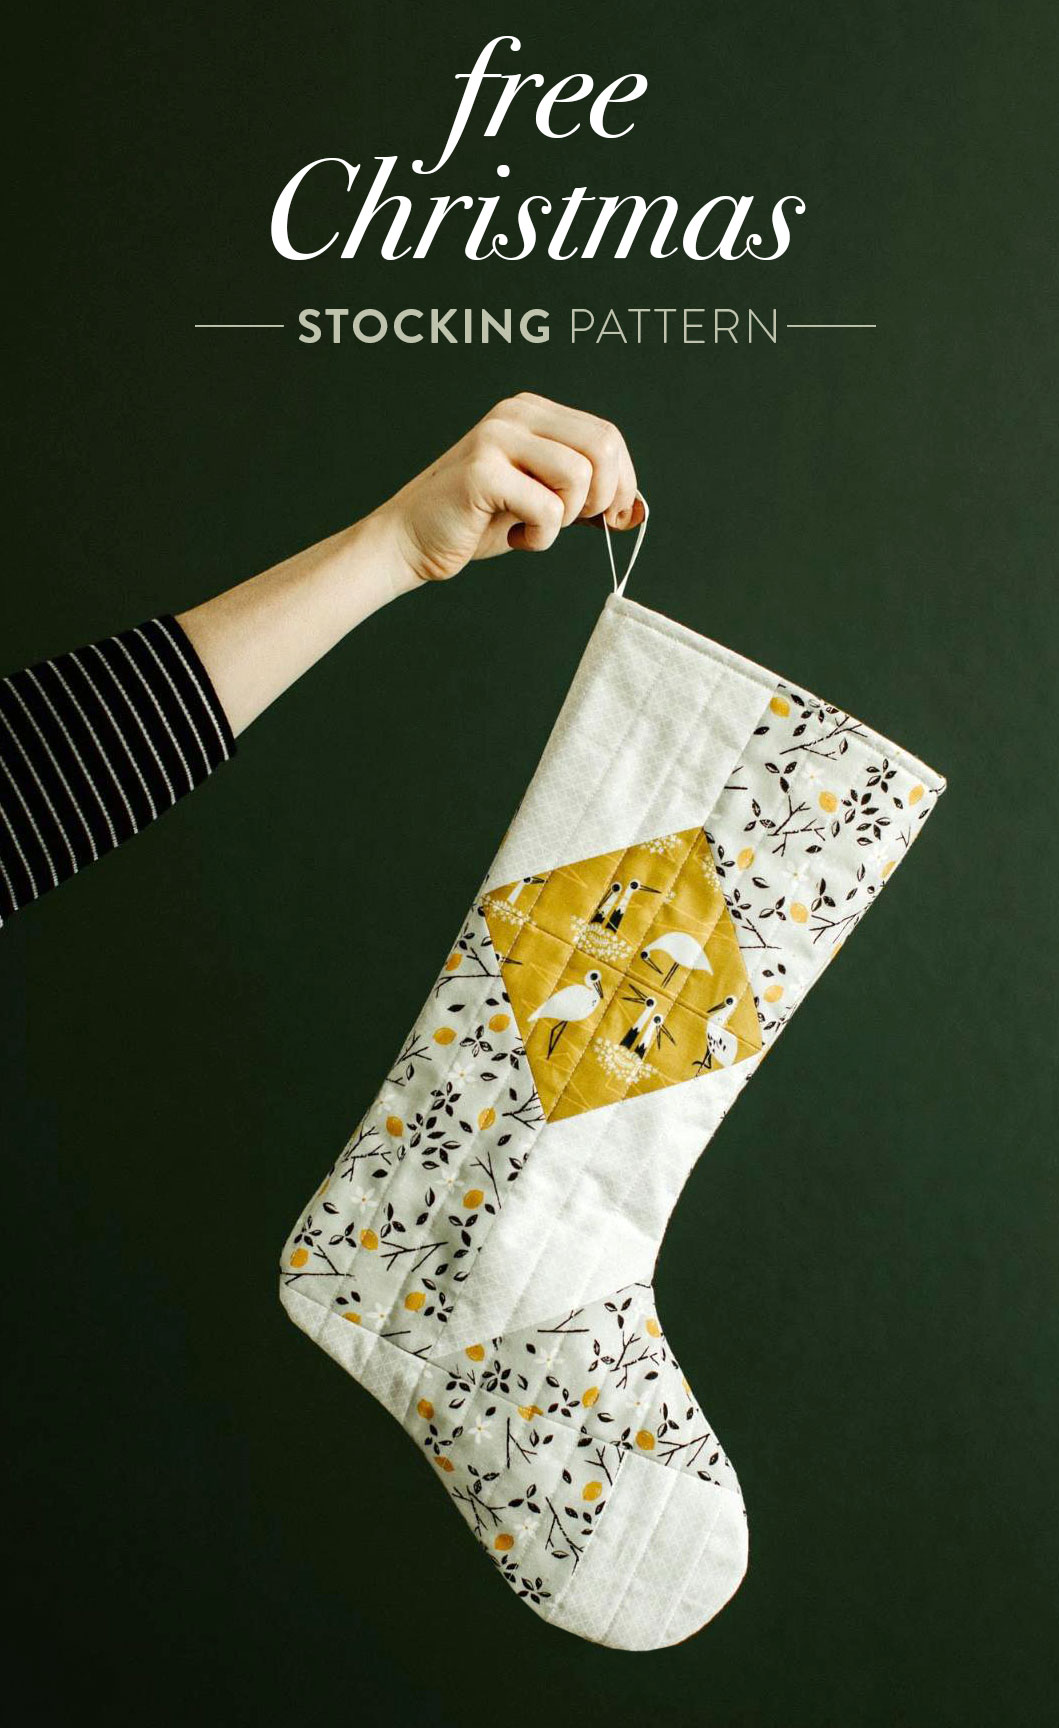 Find fast and fun presents that add a homemade touch to the holidays with our top 10 DIY holiday gift tutorials! suzyquilts.com #quilting #sewingdiy